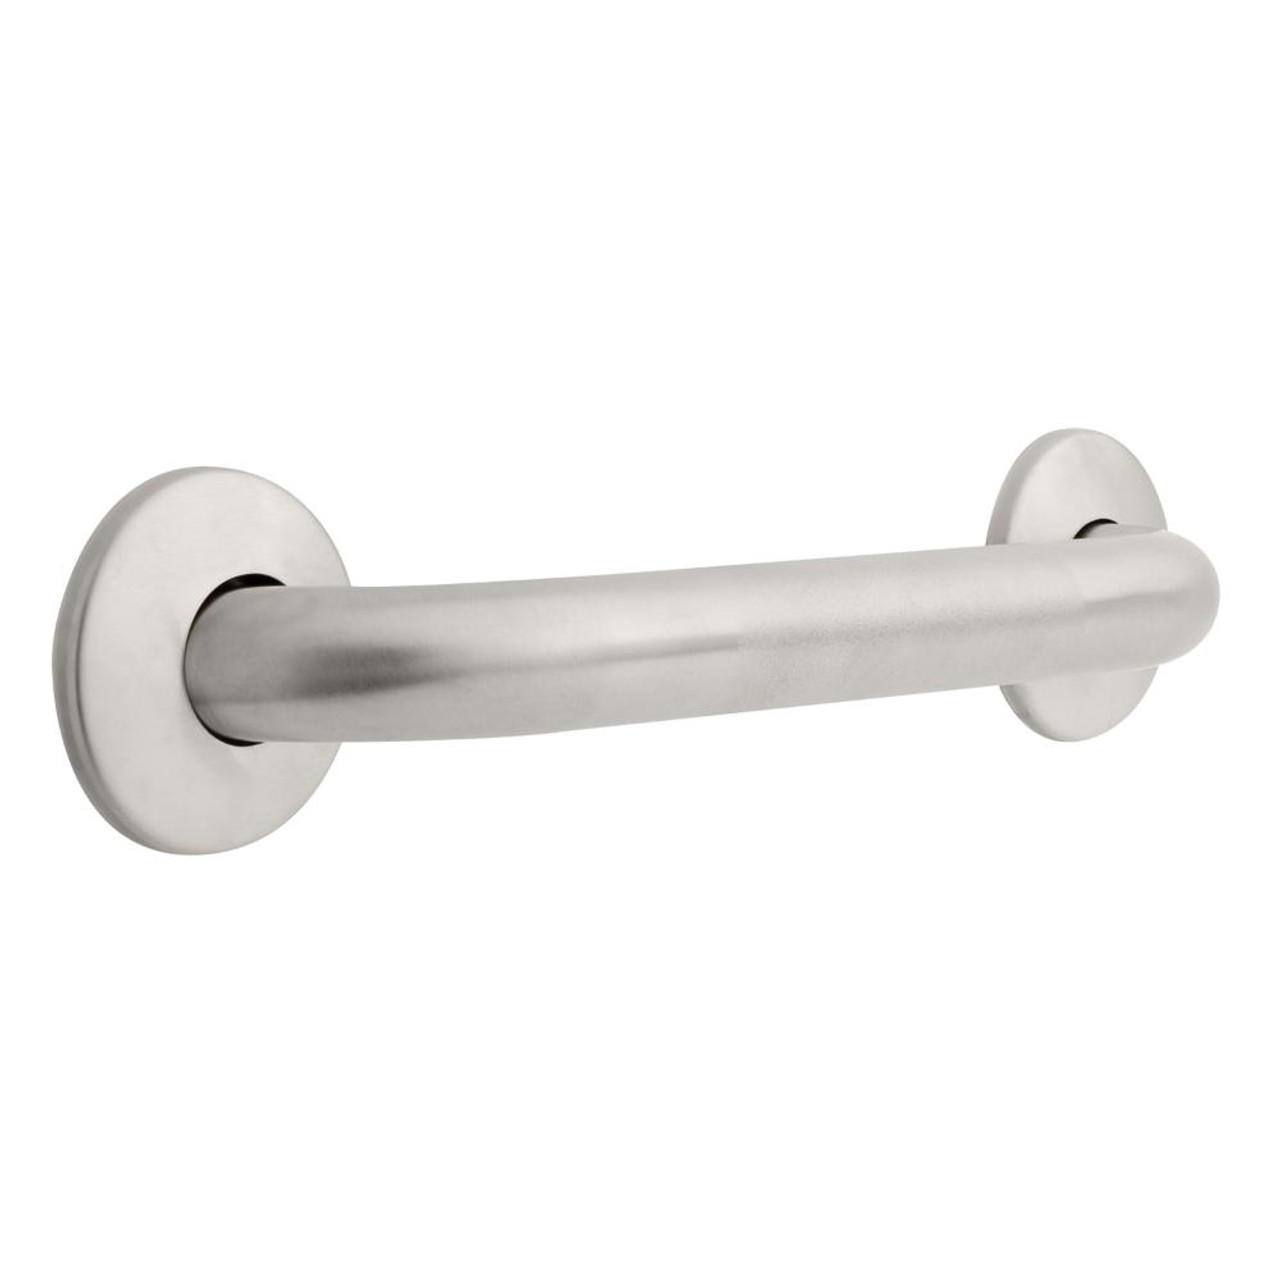 Franklin Brass 5712PS 12" Assist Grab Bar Concealed Mount Peened Stainless Steel